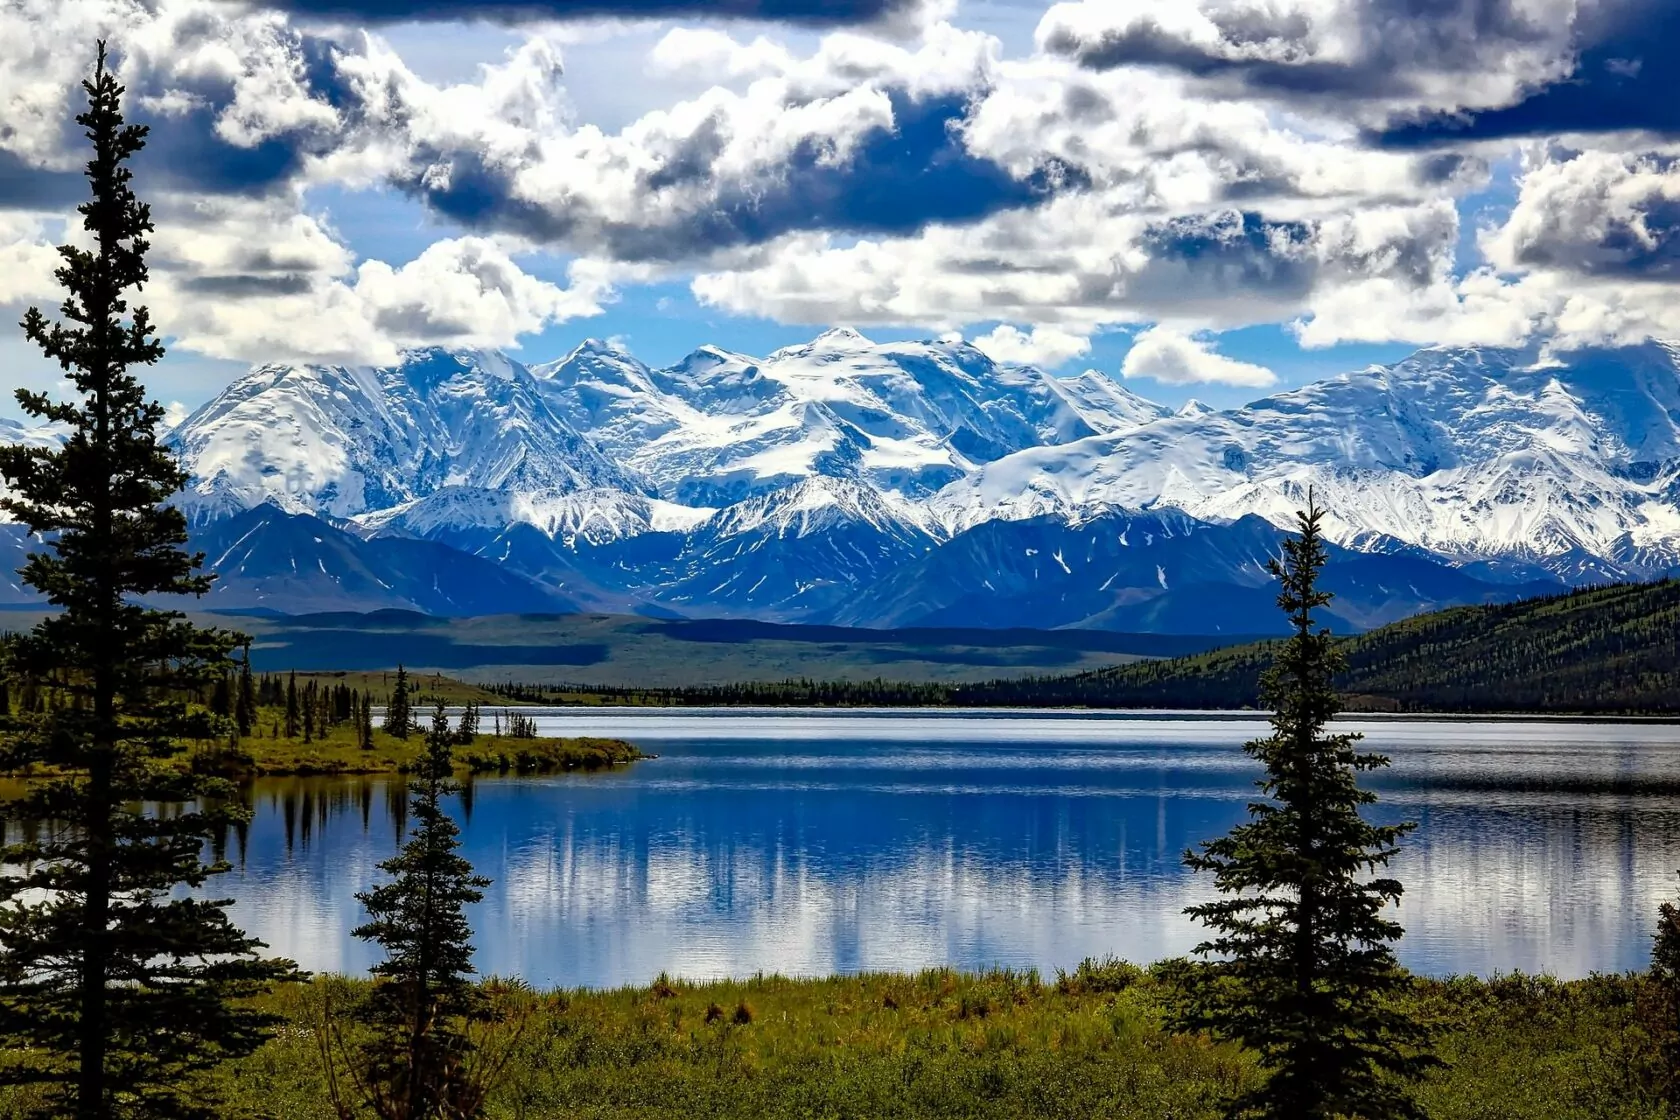 Denali National park, best national park backpacking trips in the US, guided hiking vacations, wilderness, alaska, Denali national park, mountains, snow, clouds